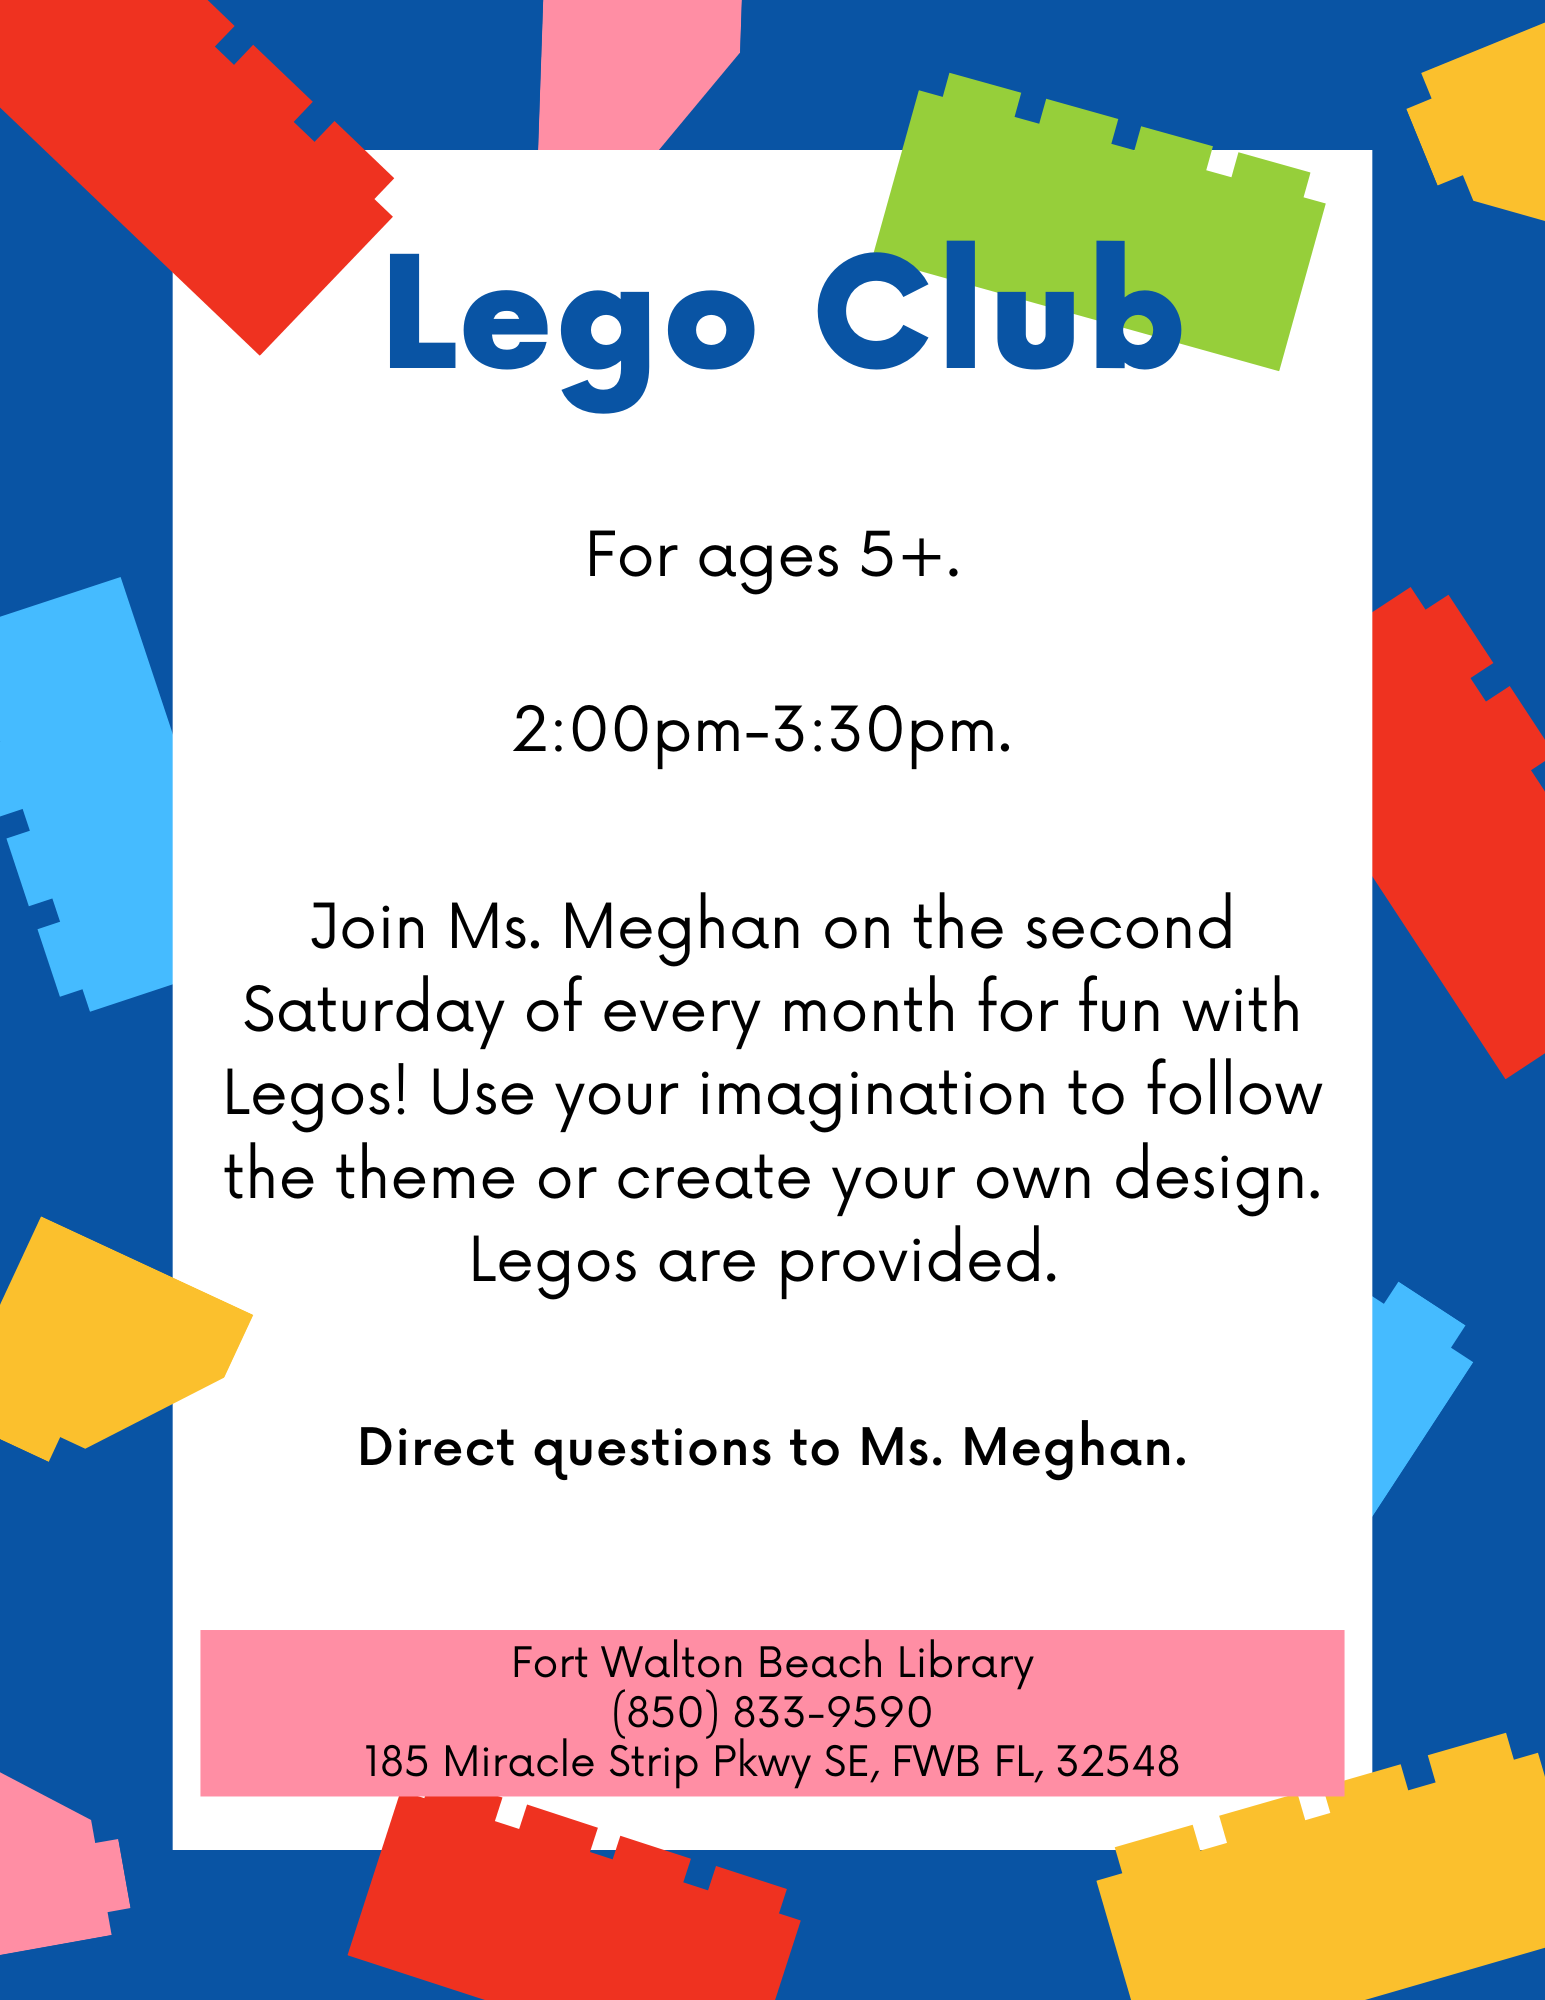 Image is a flyer with multicolored Legos around the border. "Lego Club" is written at the top in blue and all of the event information is written below.